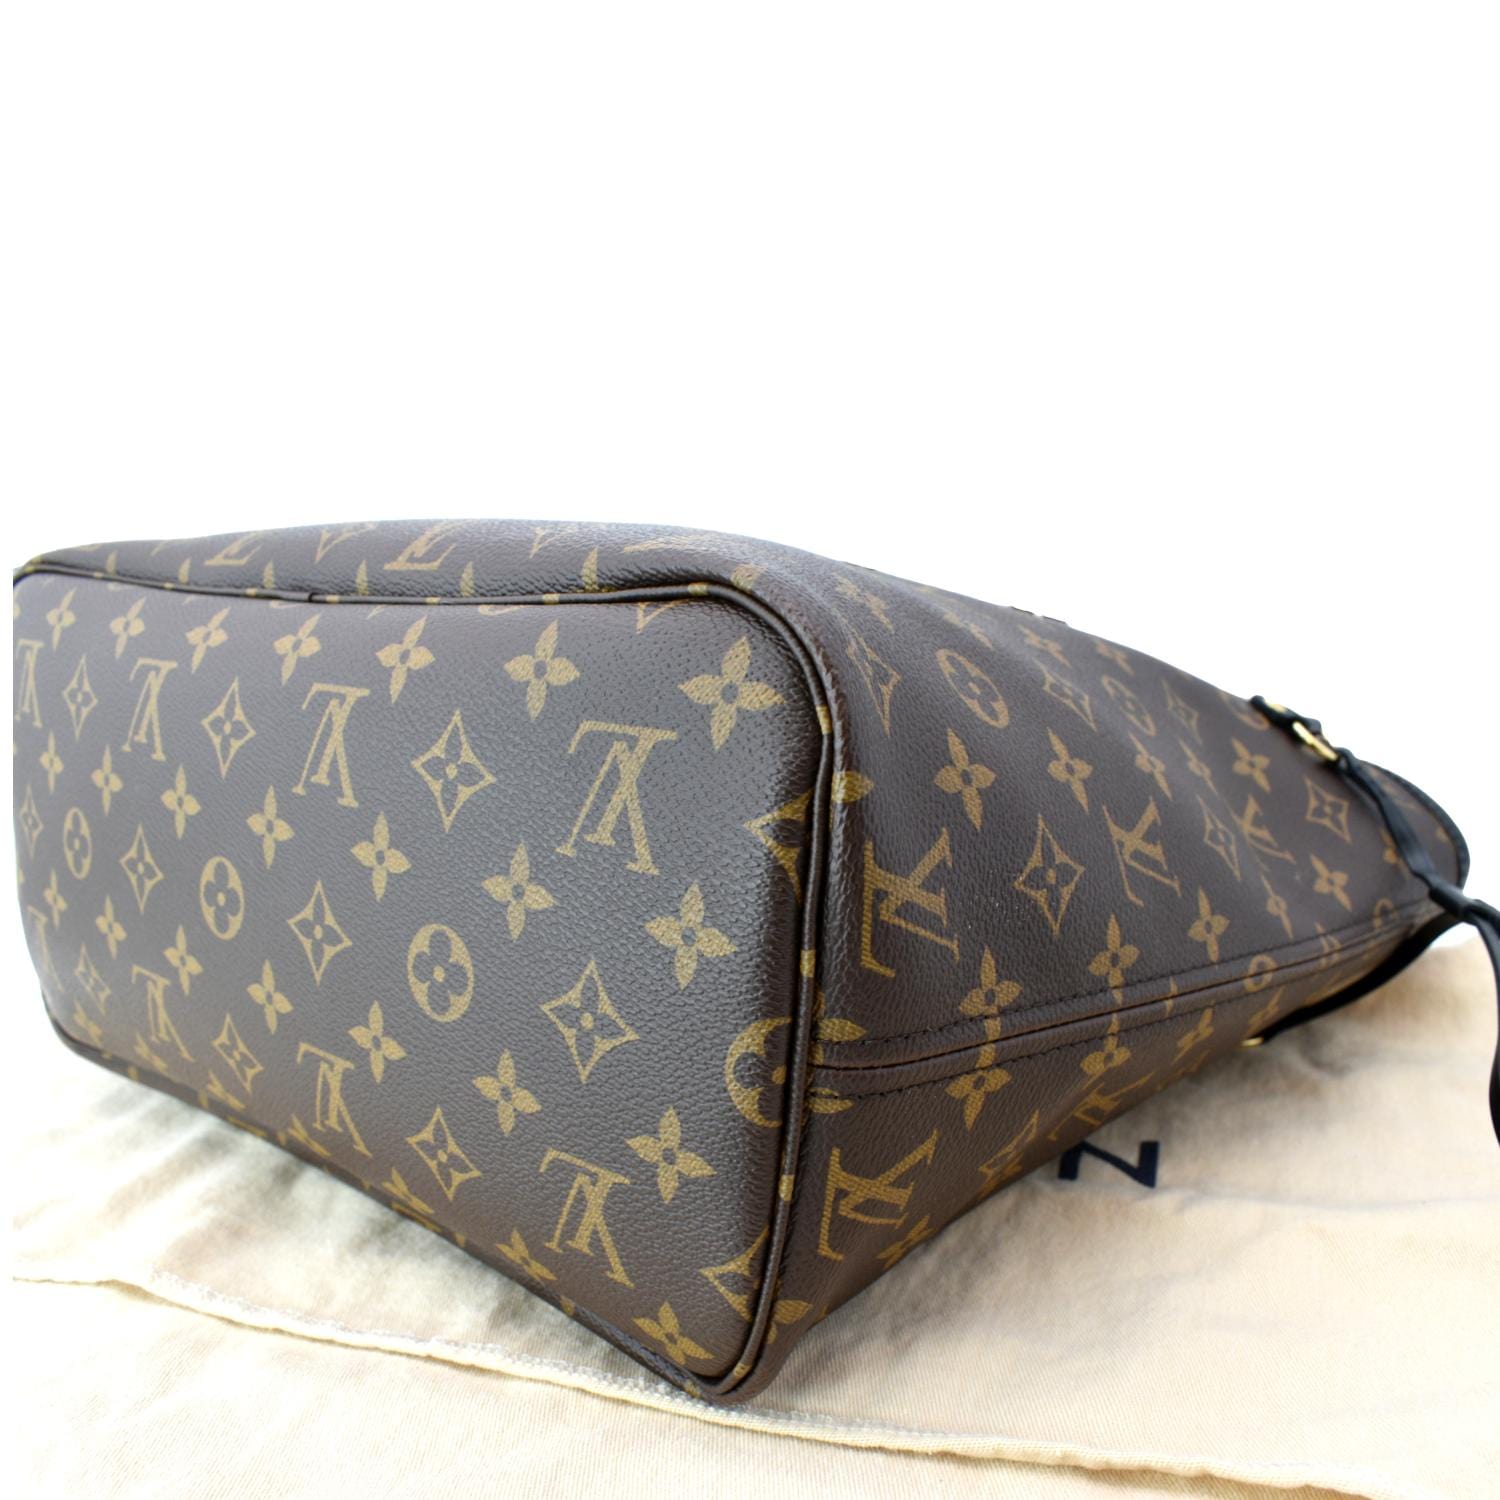 Authentic Louis Vuitton limited edition world tour neverfull pouch